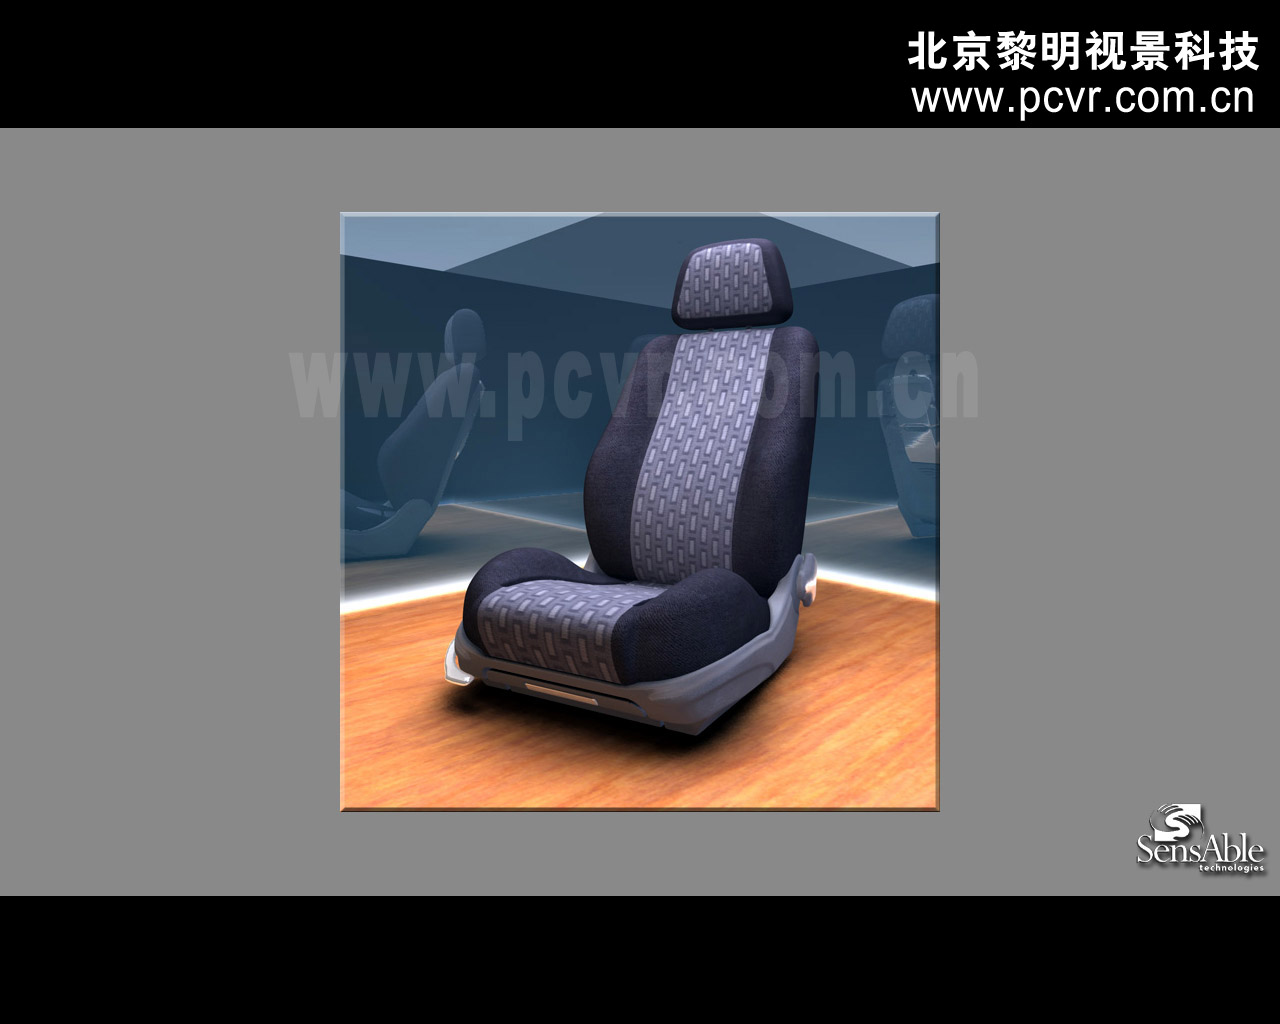 Car-Seat-blue-check-textured-FORMATTED.jpg